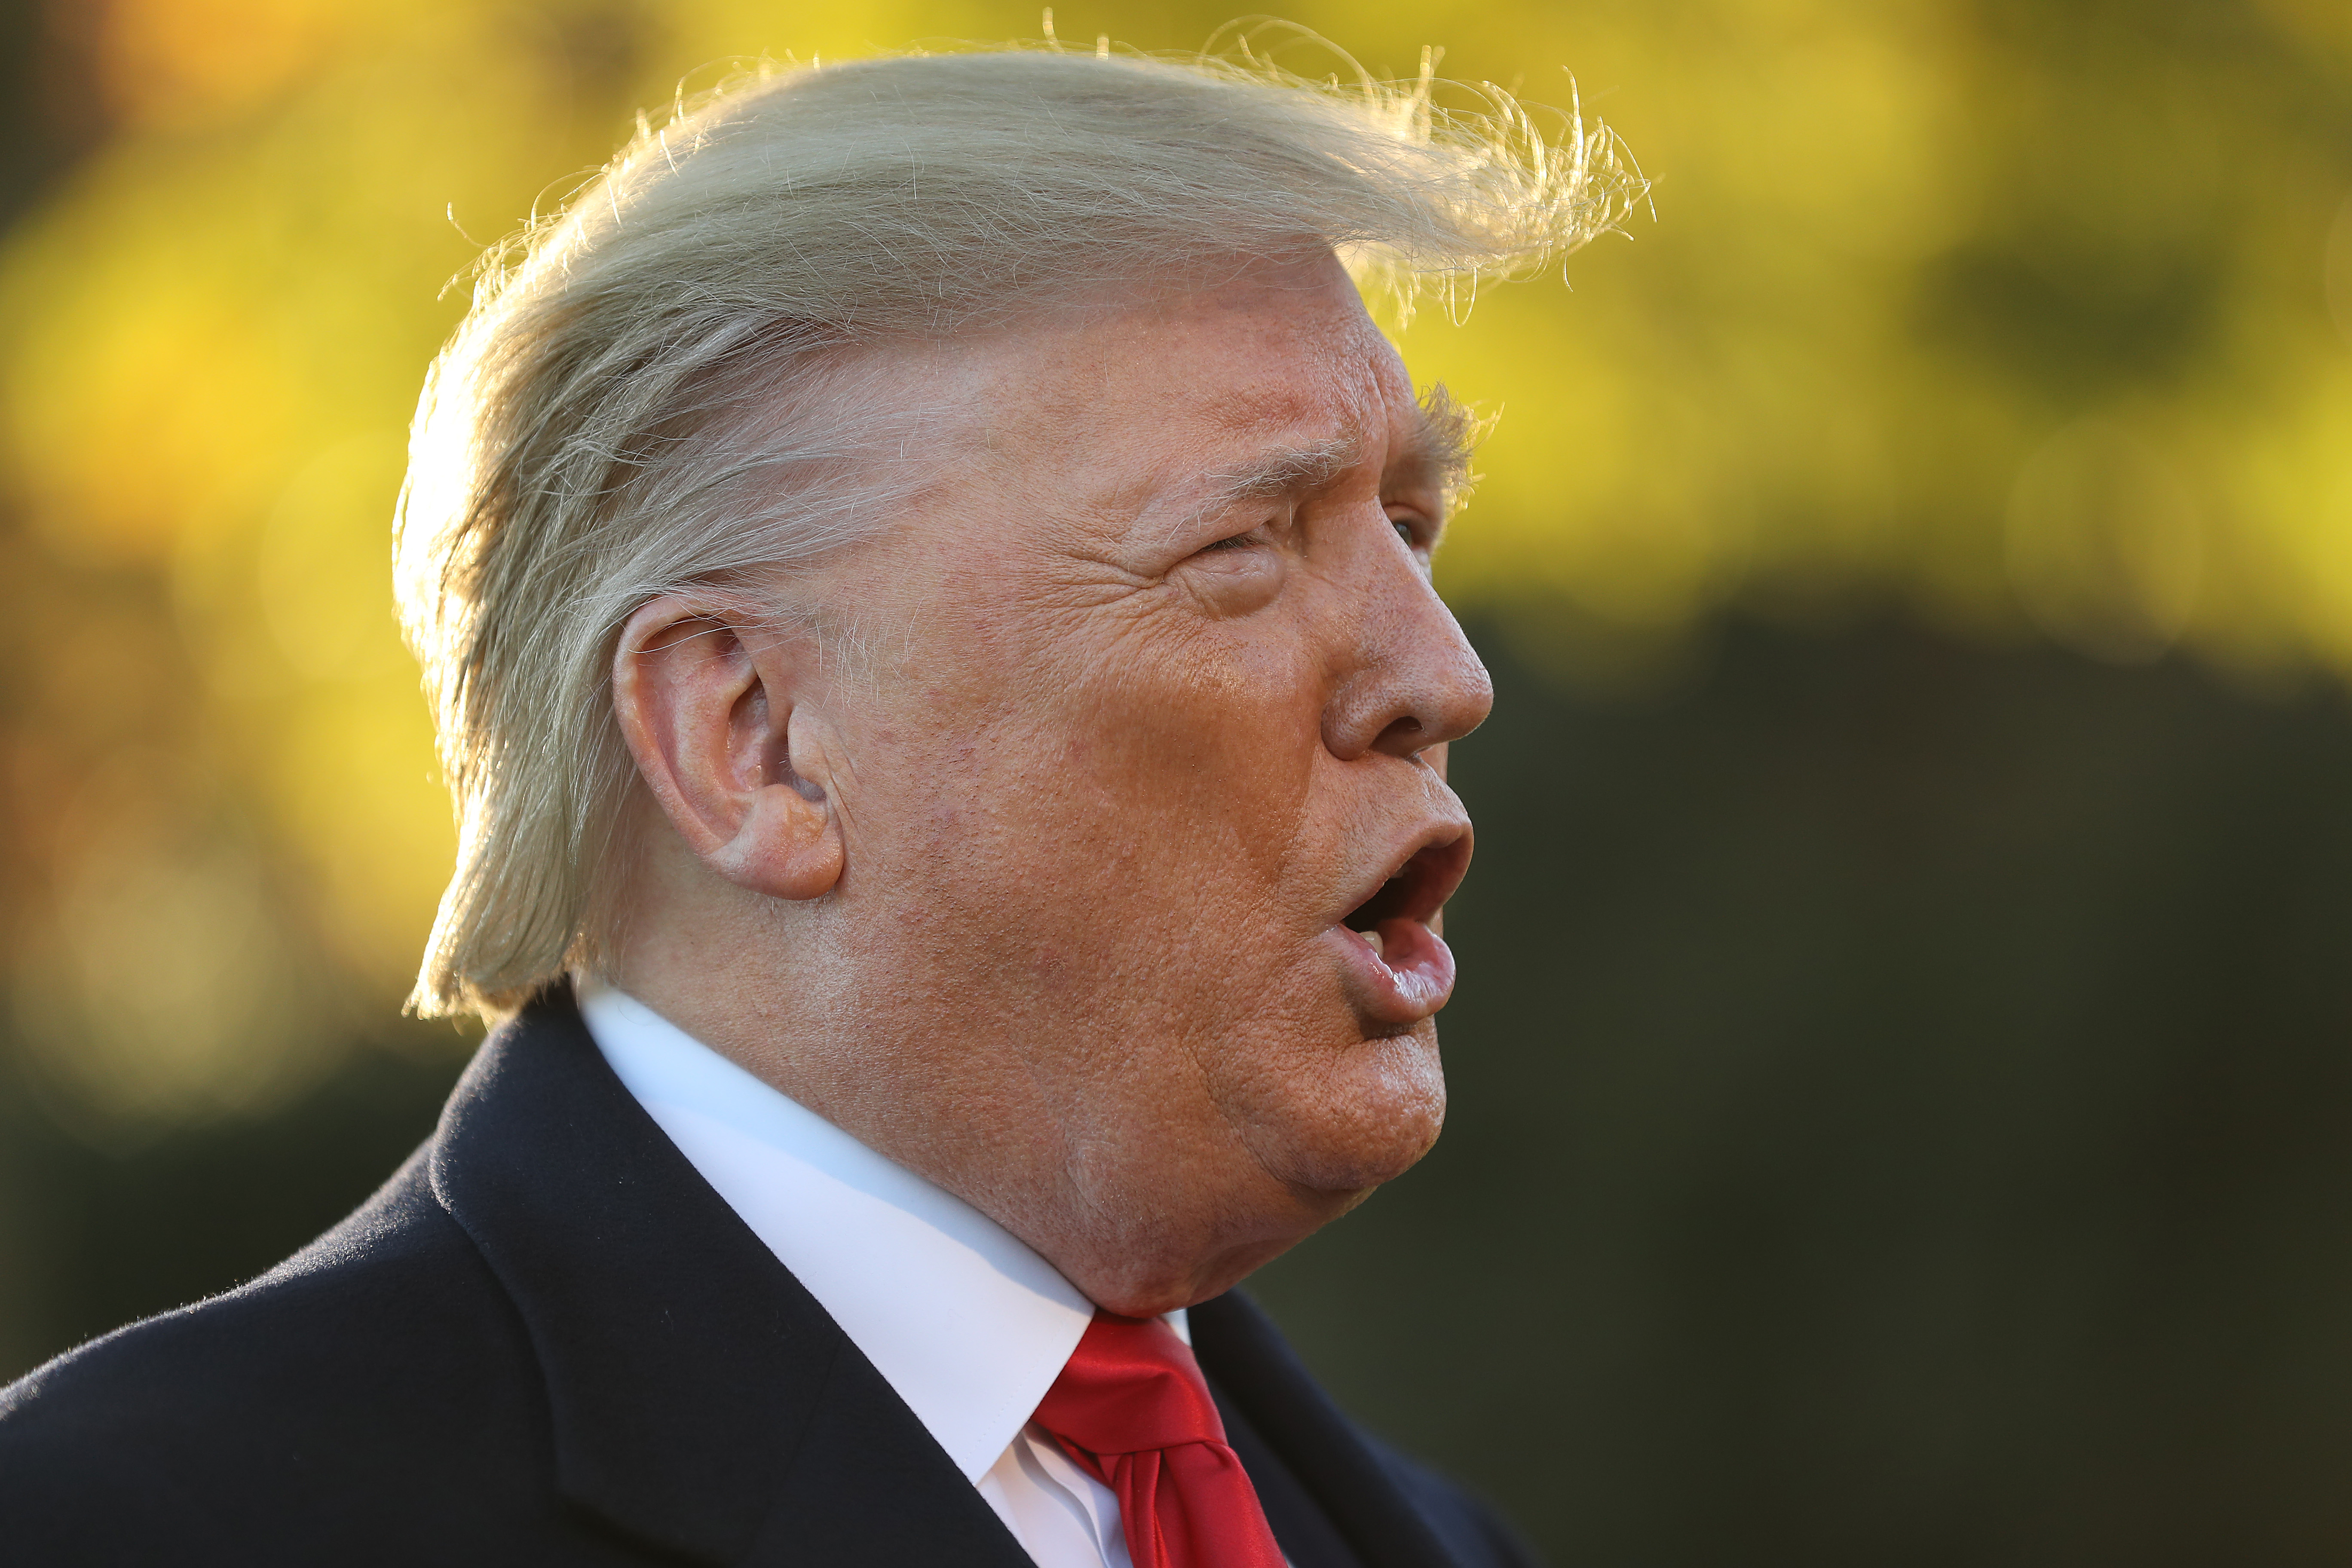 U.S. President Donald Trump talks to reporters before departing the White House November 01, 2019 in Washington, DC. (Chip Somodevilla/Getty Images)